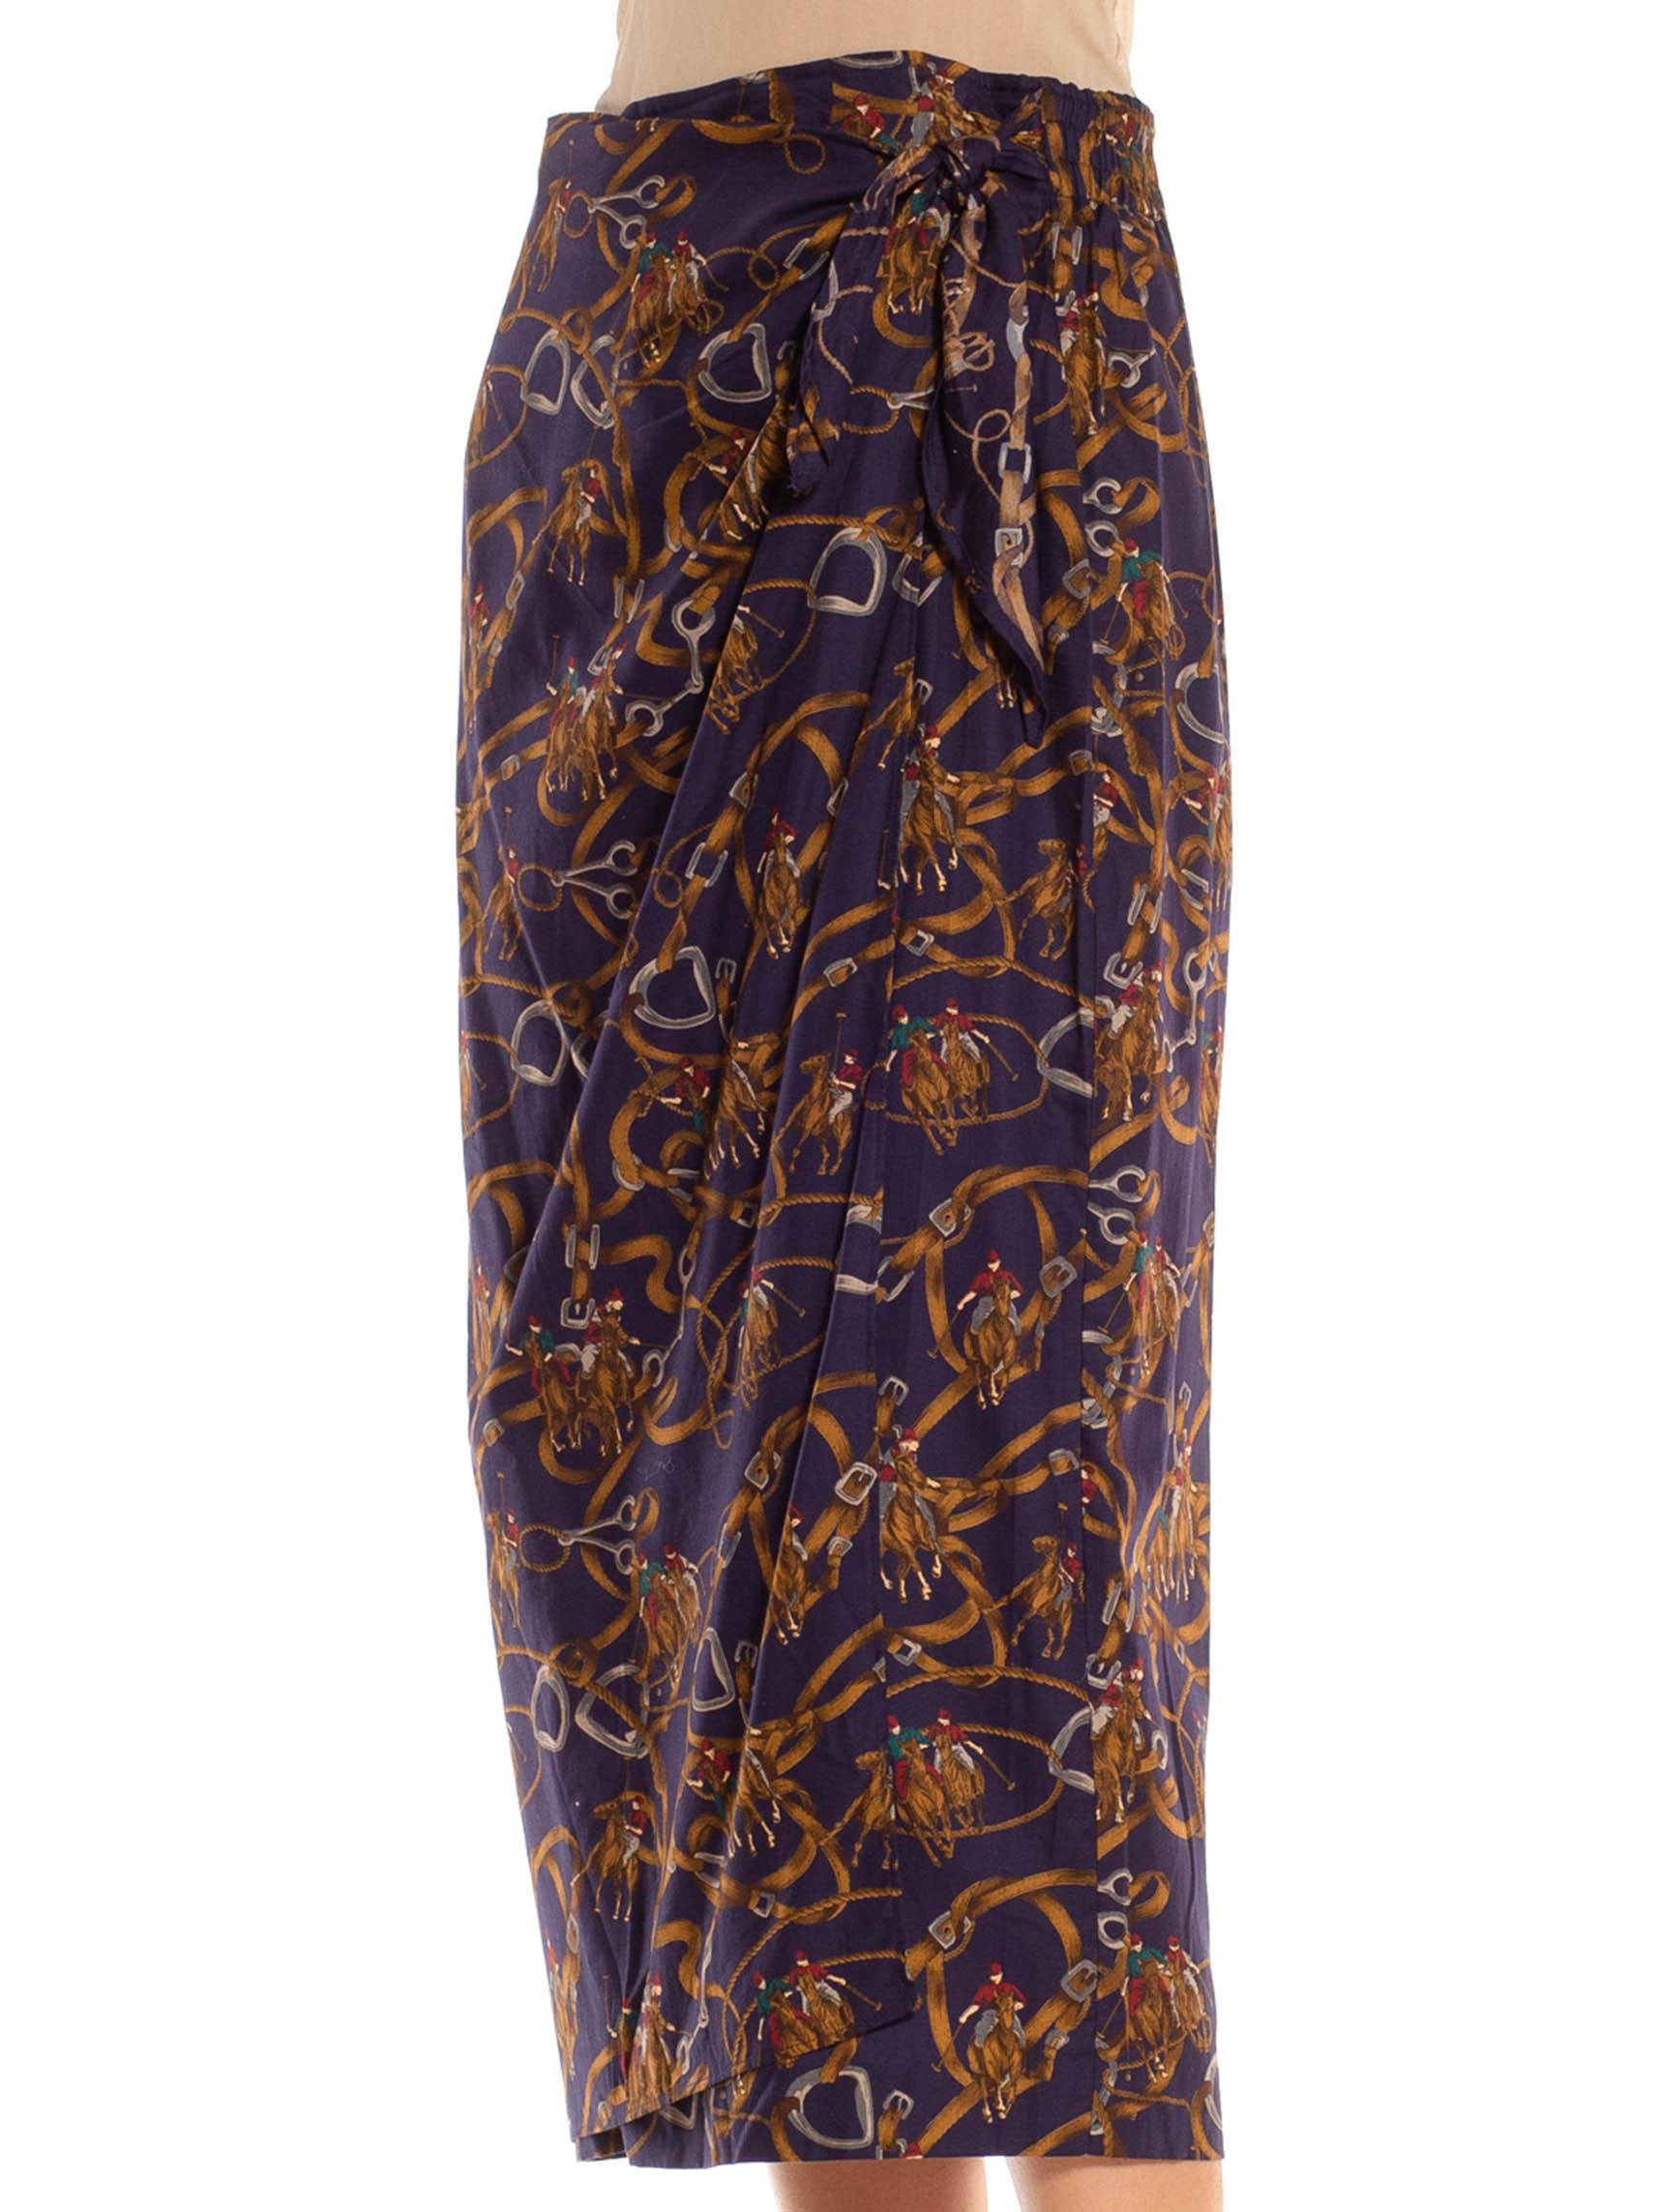 1990S Navy & Brown Cotton Blend Equestrian Print Skirt For Sale 4